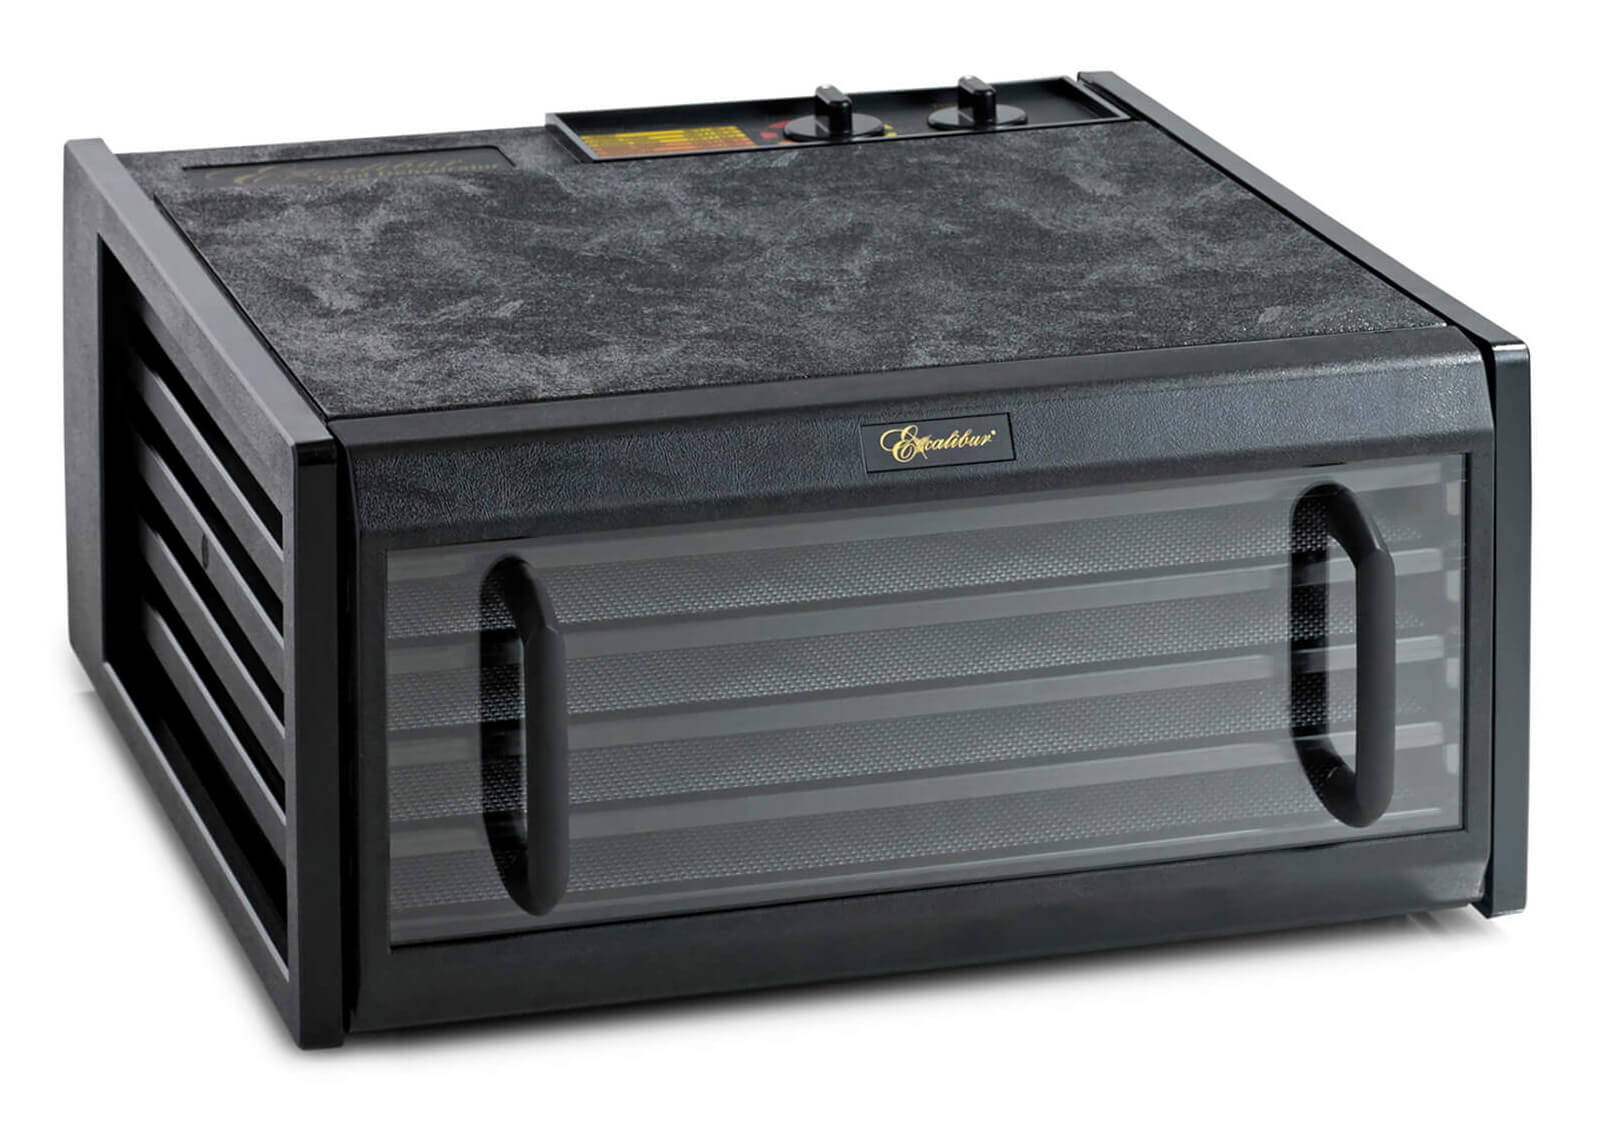 Excalibur 4526TCDB 5 tray dehydrator with clear door closed.